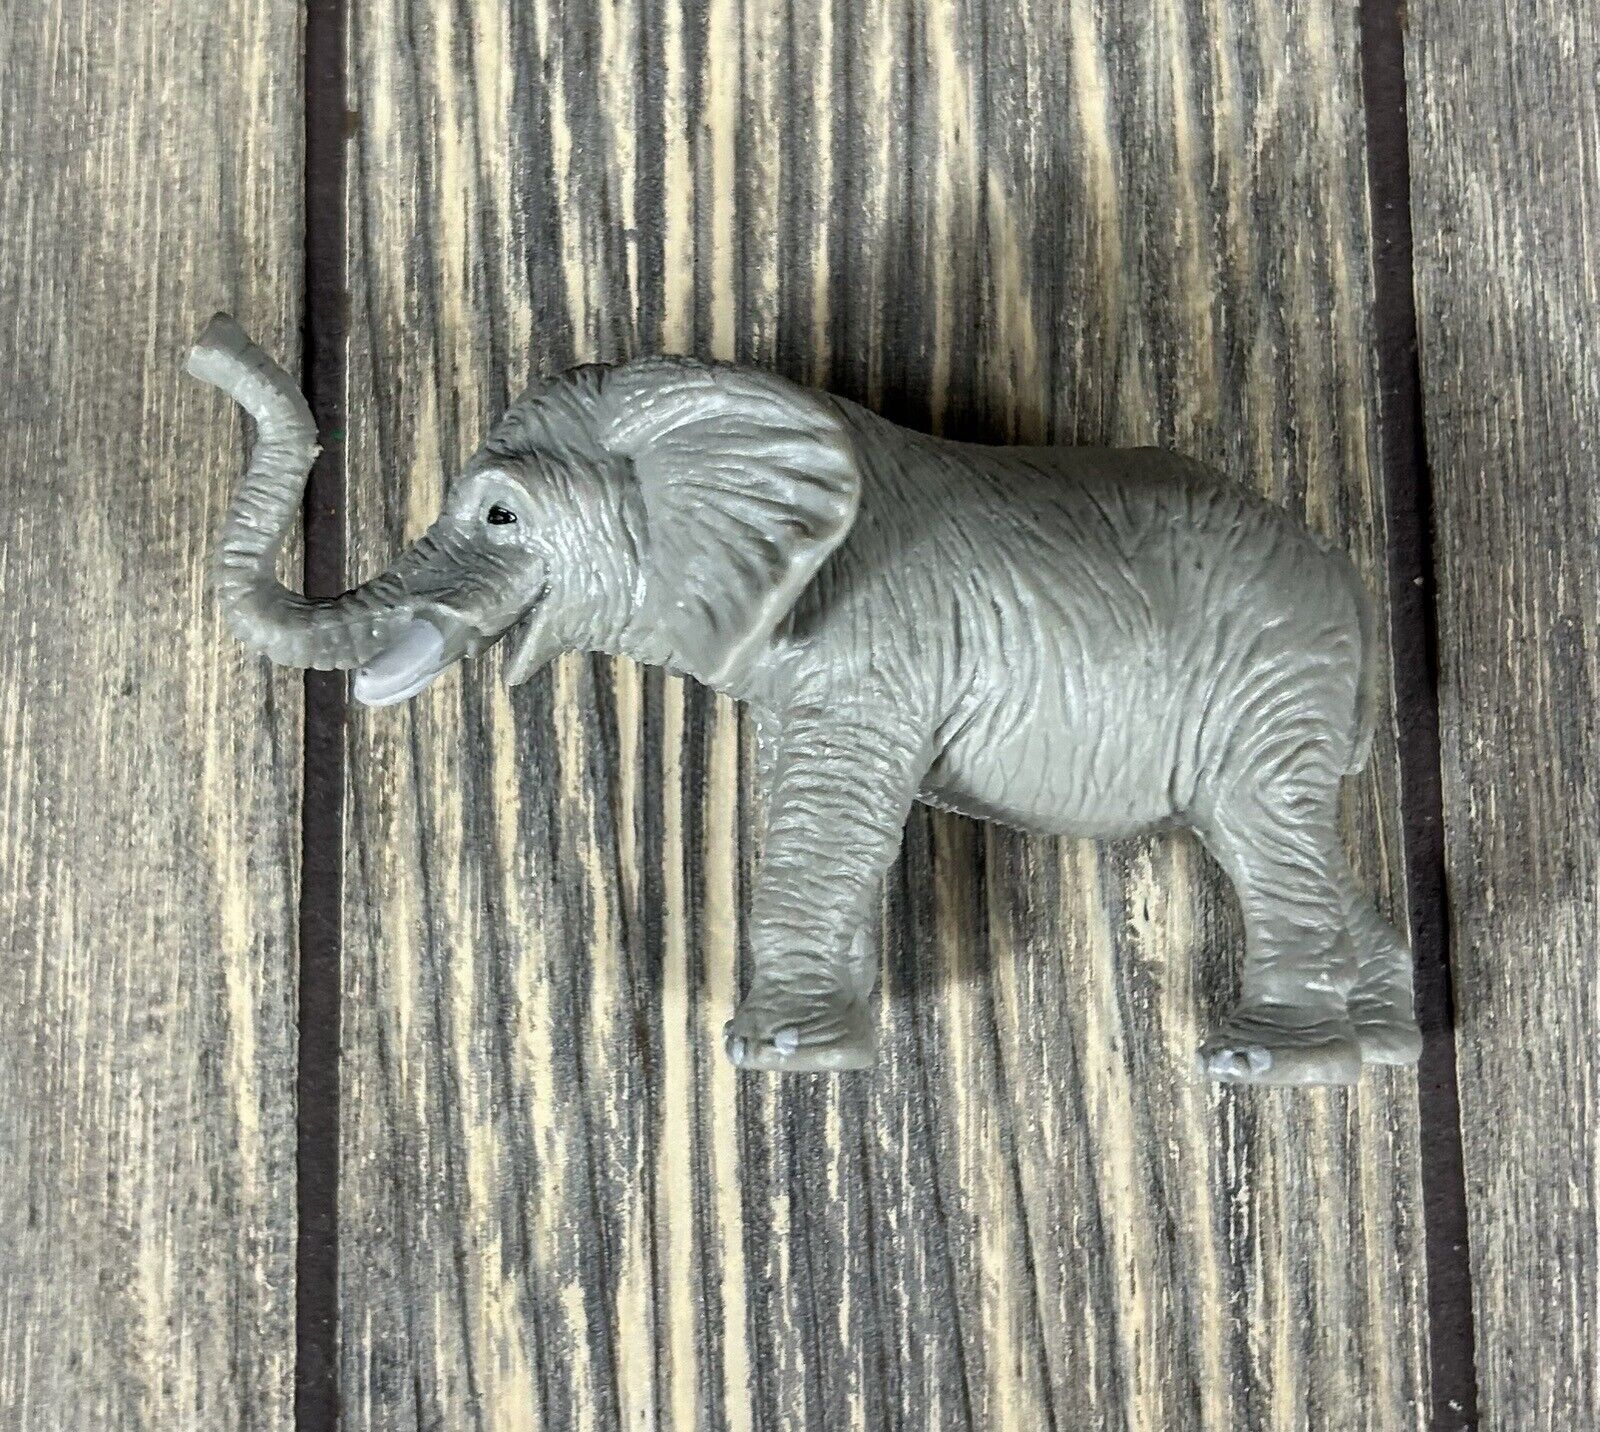 Gray Elephant Figure Figurine Toy 4” S.H. Made In China